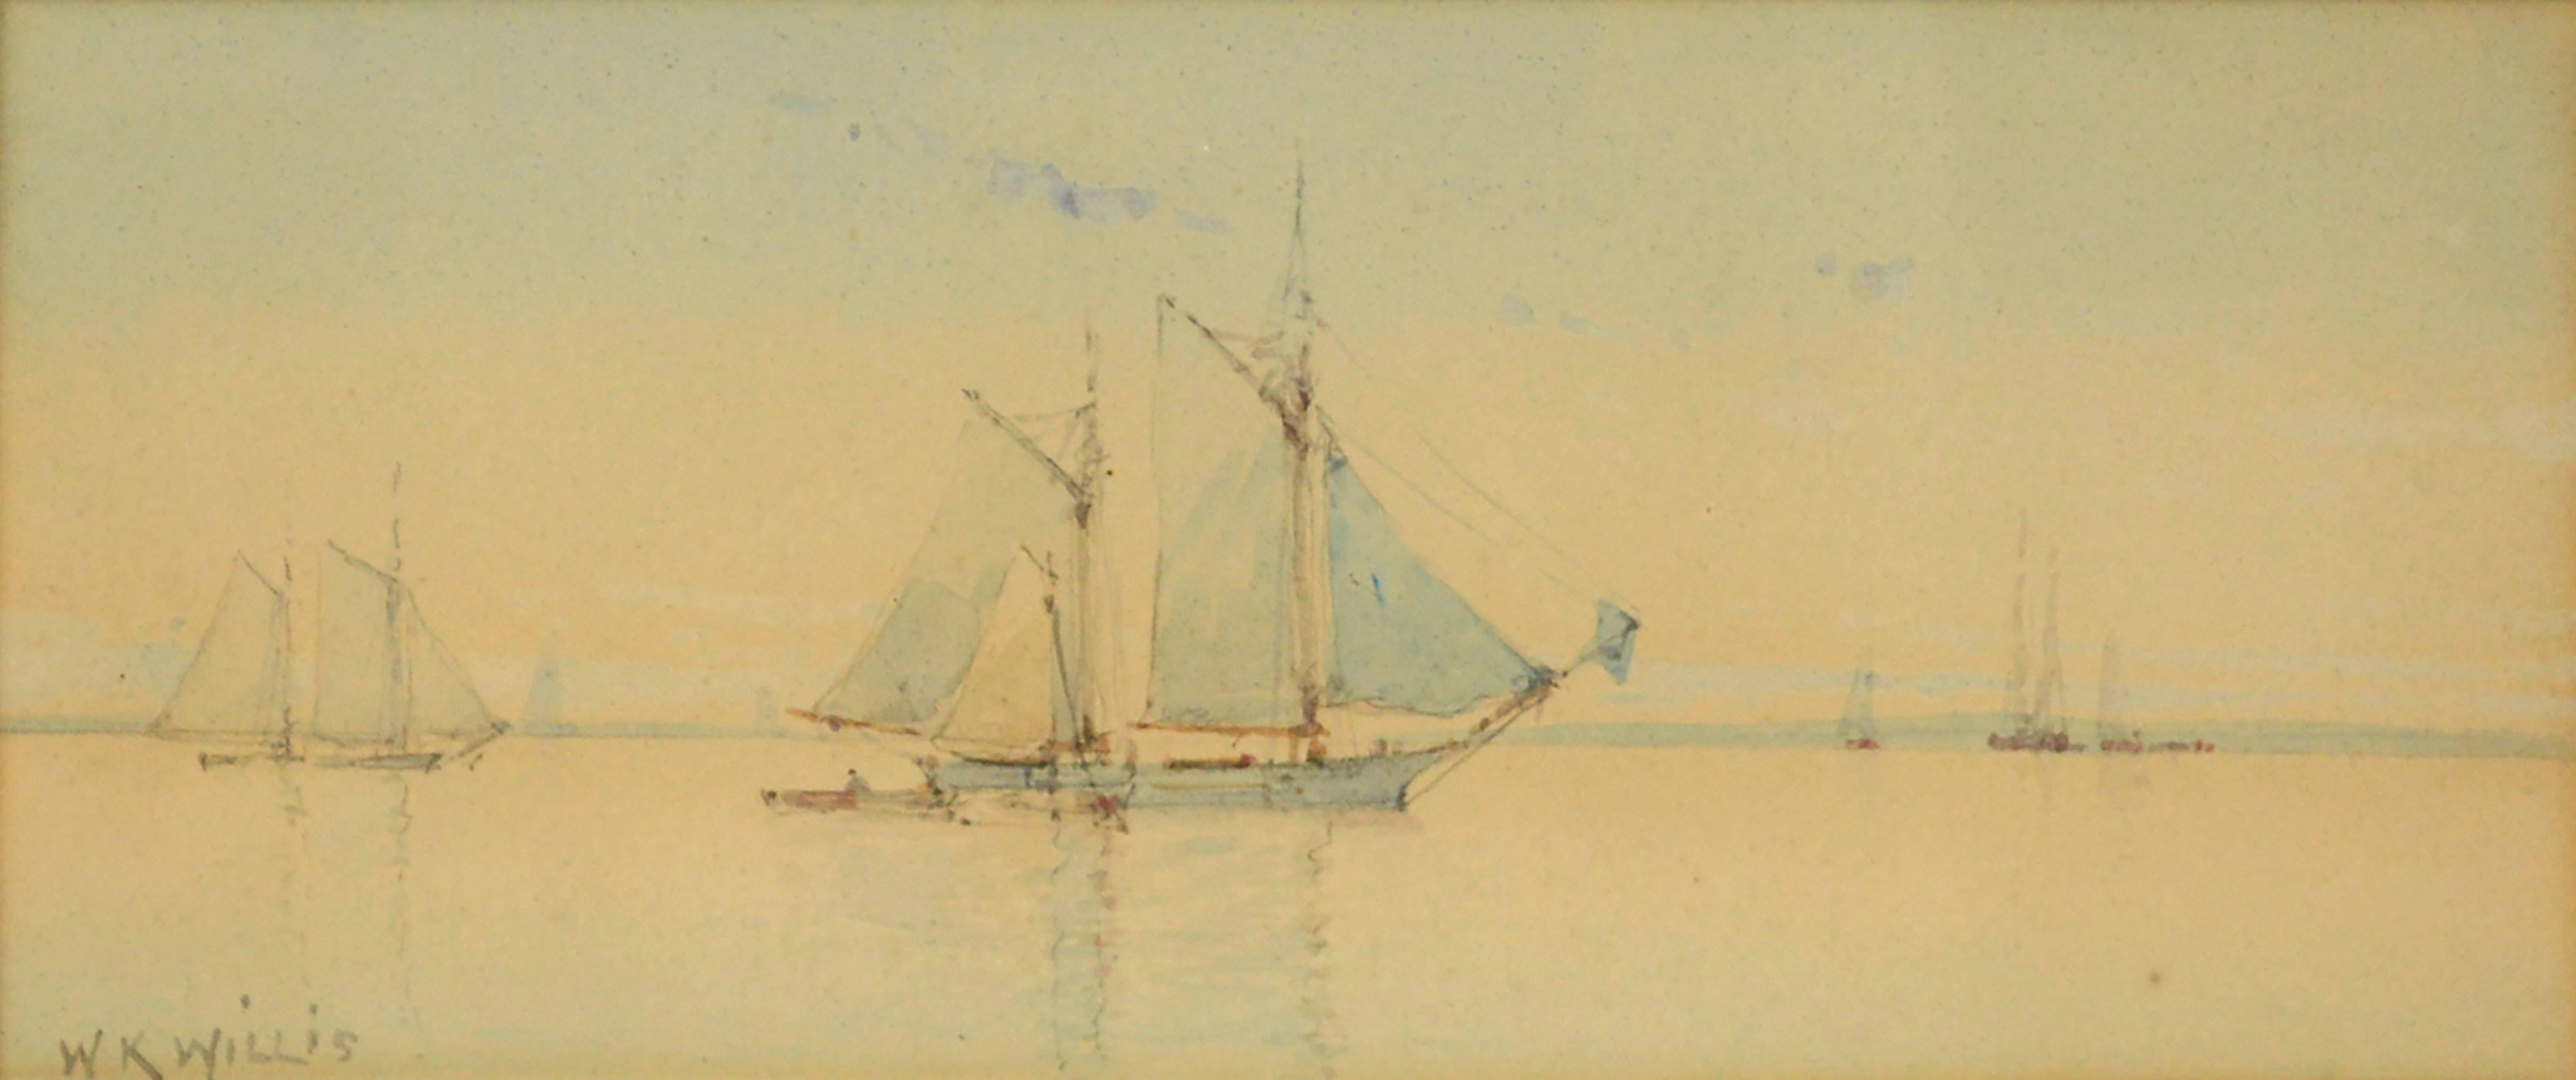 Schooners at Sail, Early 20th Century Maritime Watercolor Seascape  - Art by W.K. Willis